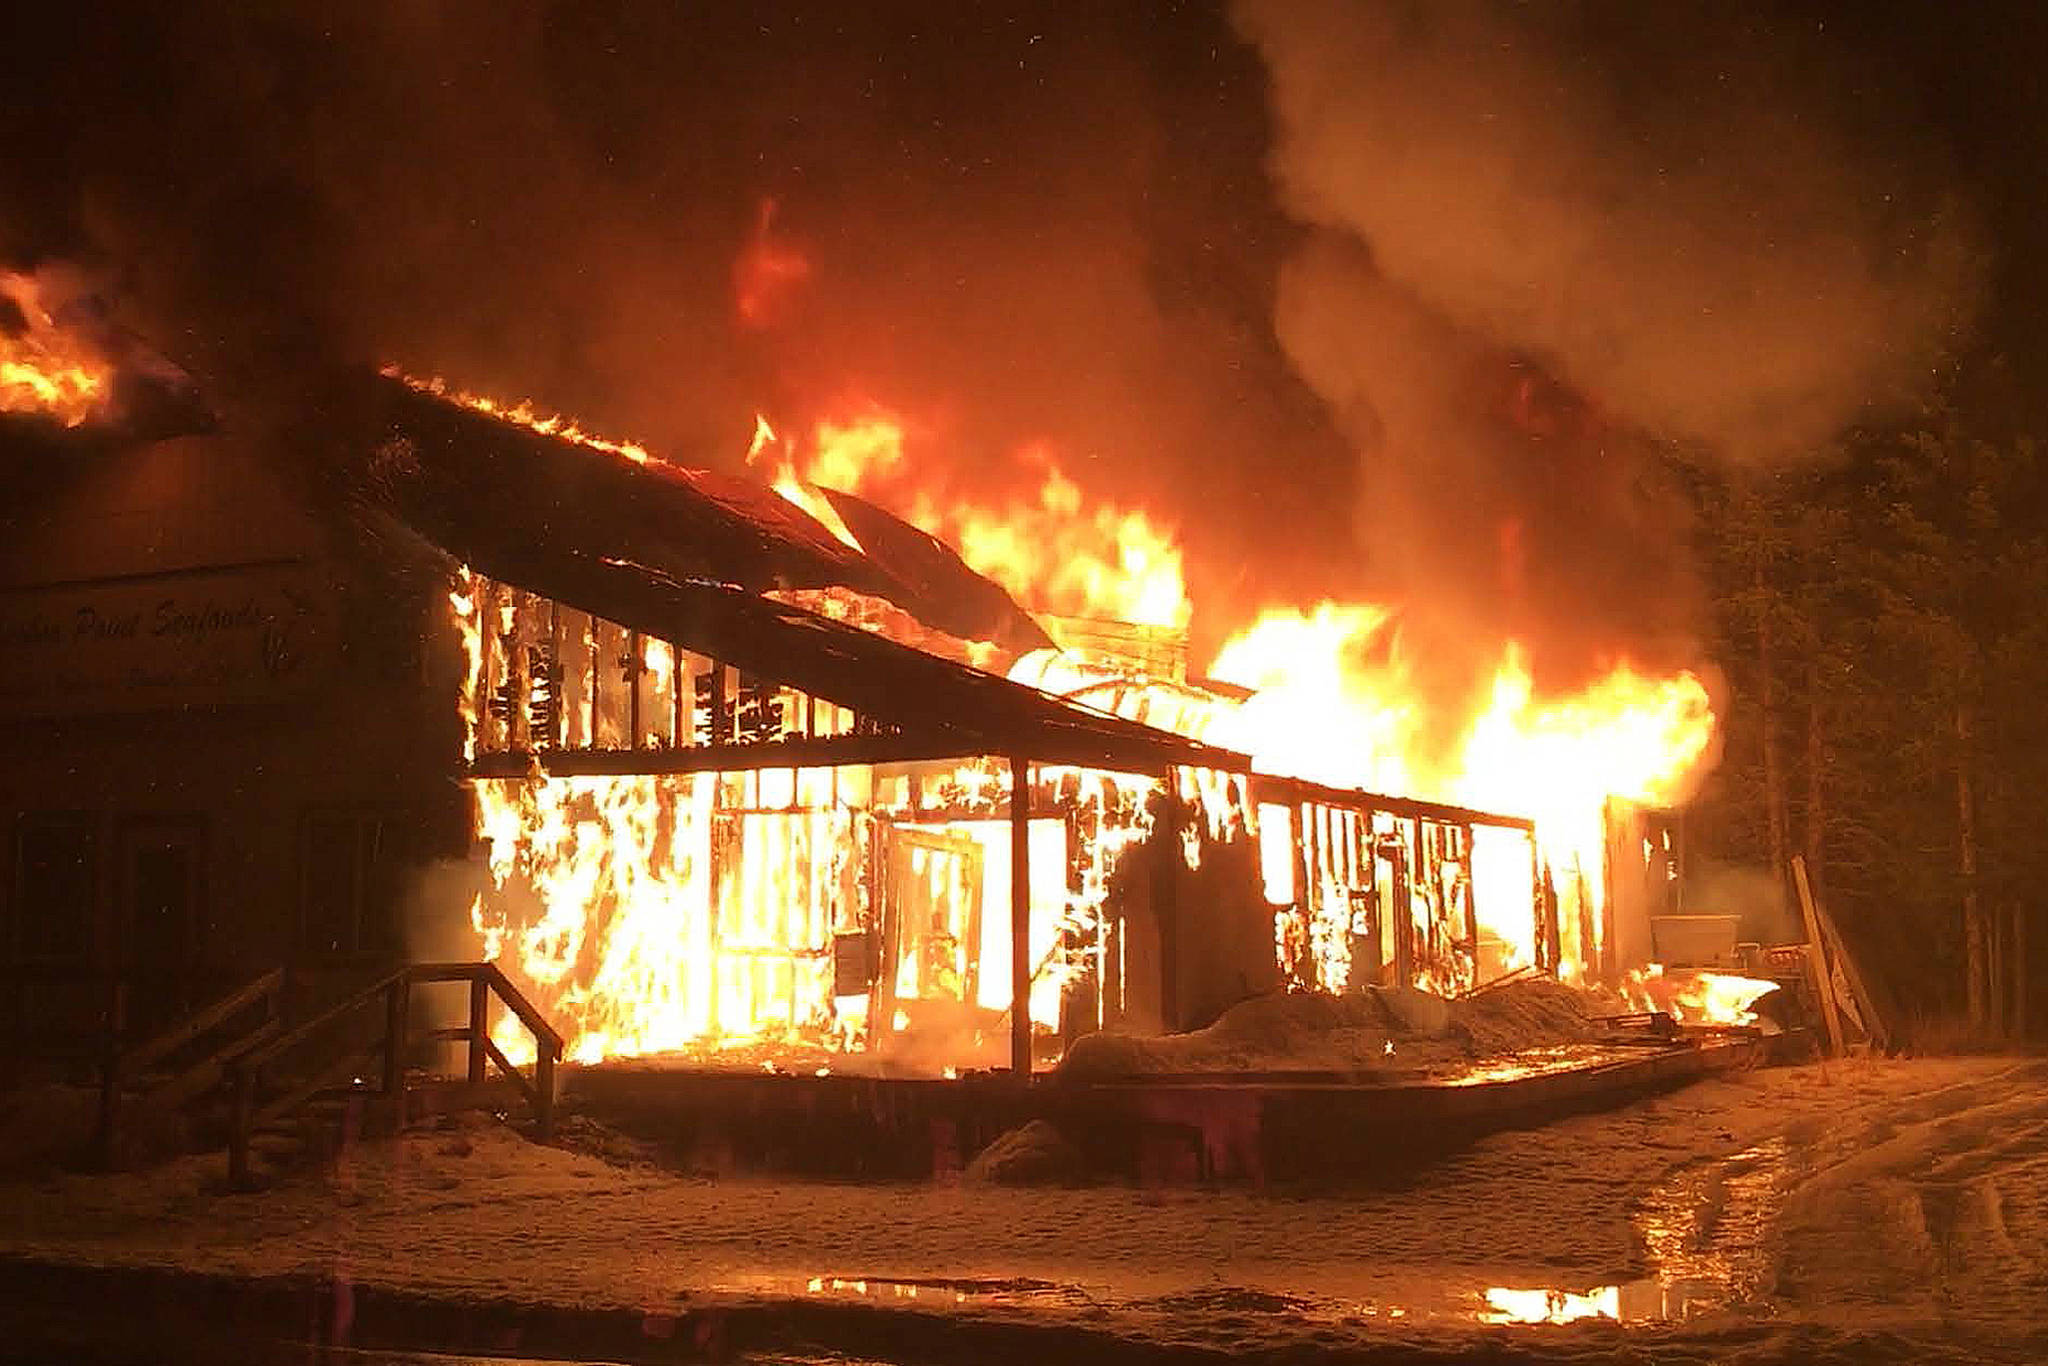 The former location of Anchor Point Seafoods sits ablaze Saturday, Jan. 26, 2019 on North Fork Road in Anchor Point, Alaska. (Photo courtesy Anchor Point Emergency Services)